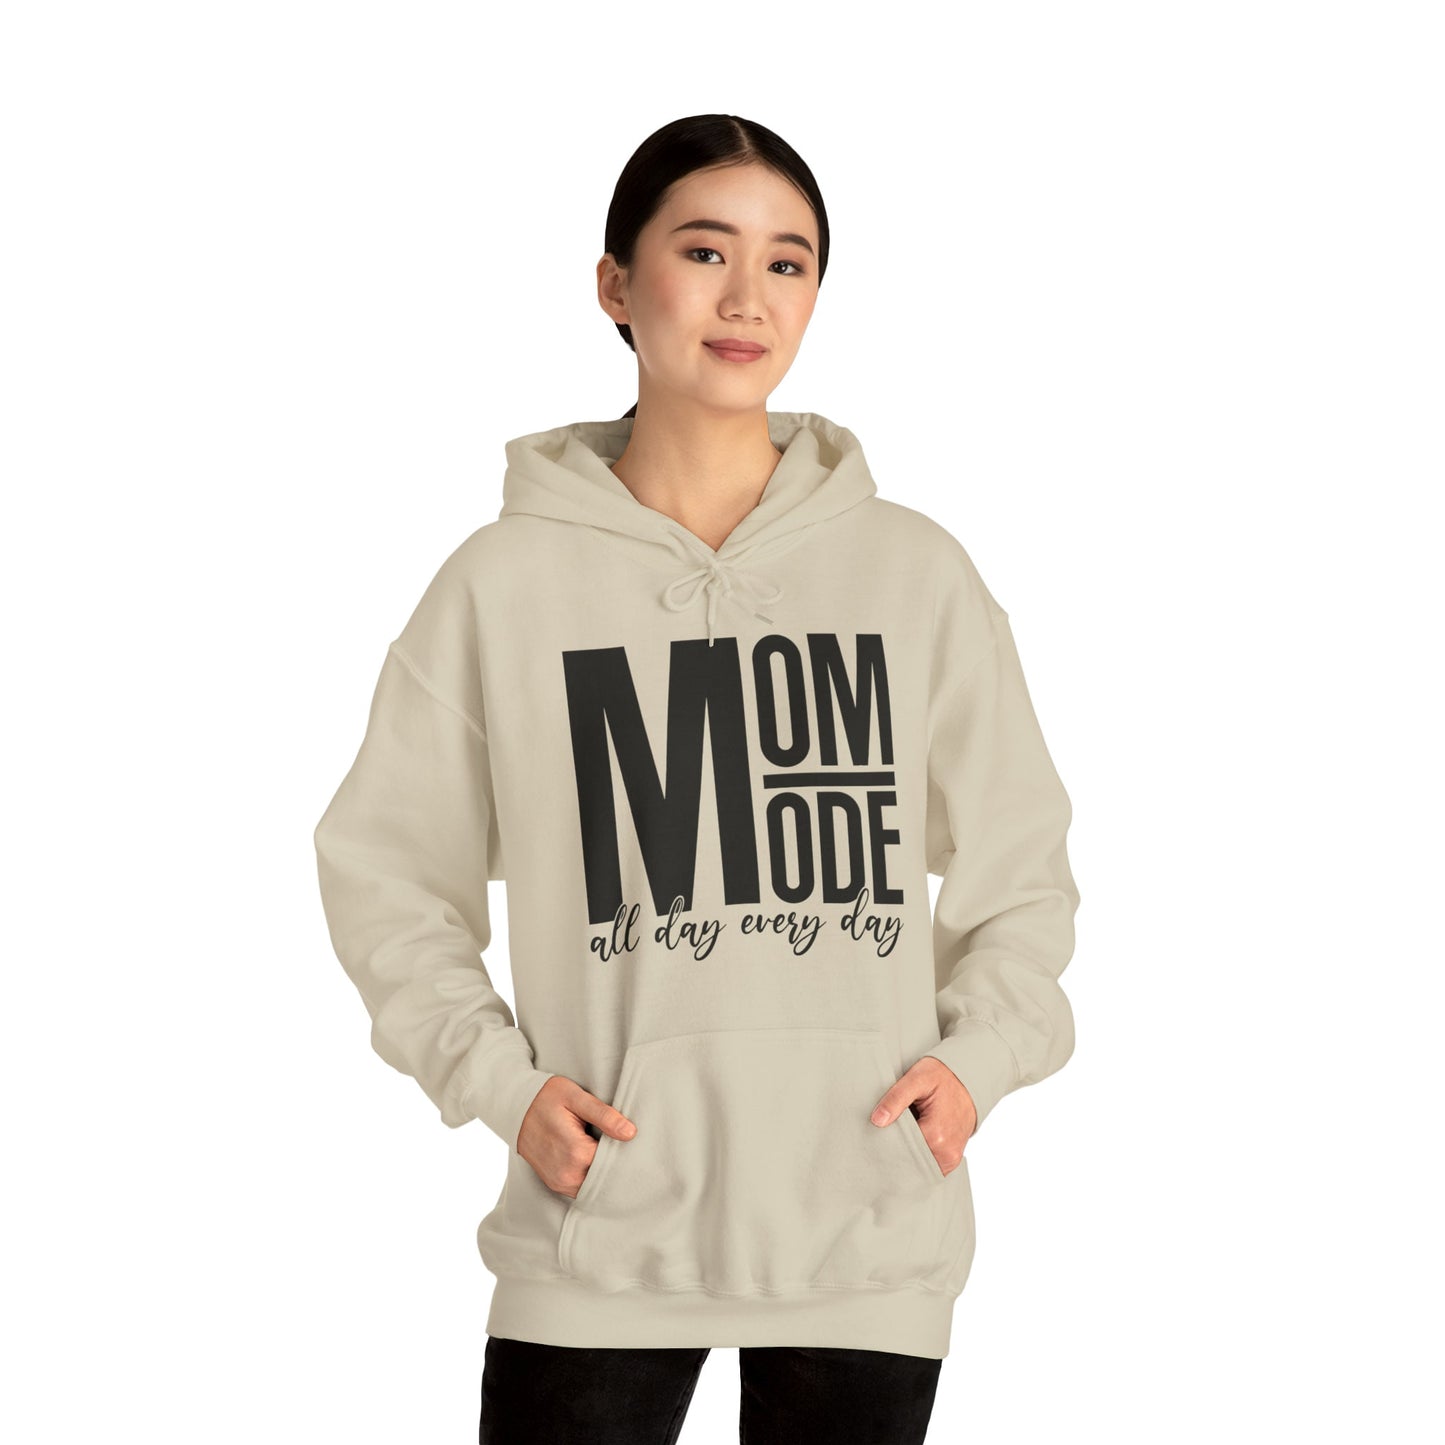 MOM Mode - All Day Every Day - Best Mom - Celebrate Mom - Strong Woman - Mom Humor - Unisex Heavy Blend™ Hooded Sweatshirt